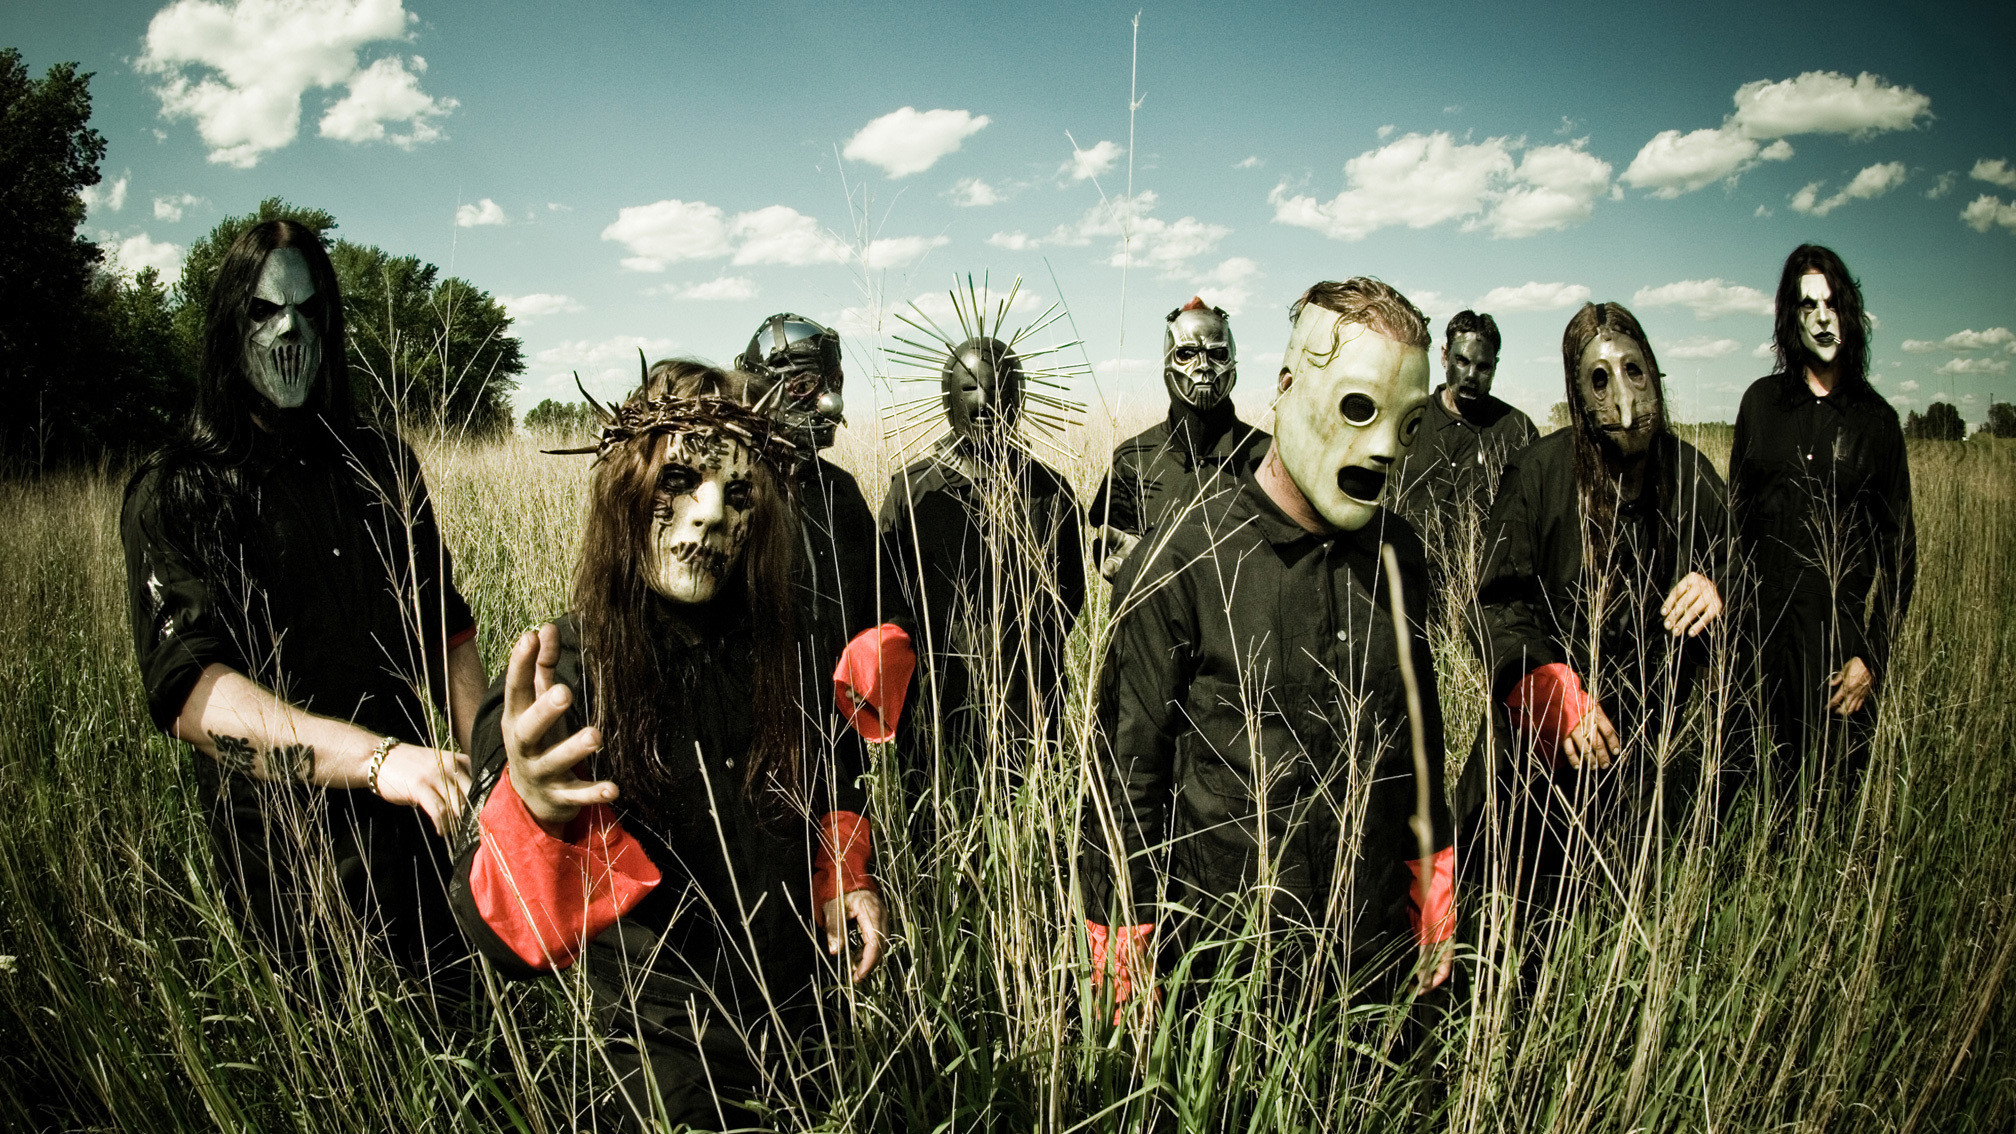 Meaning of Spiders by Slipknot